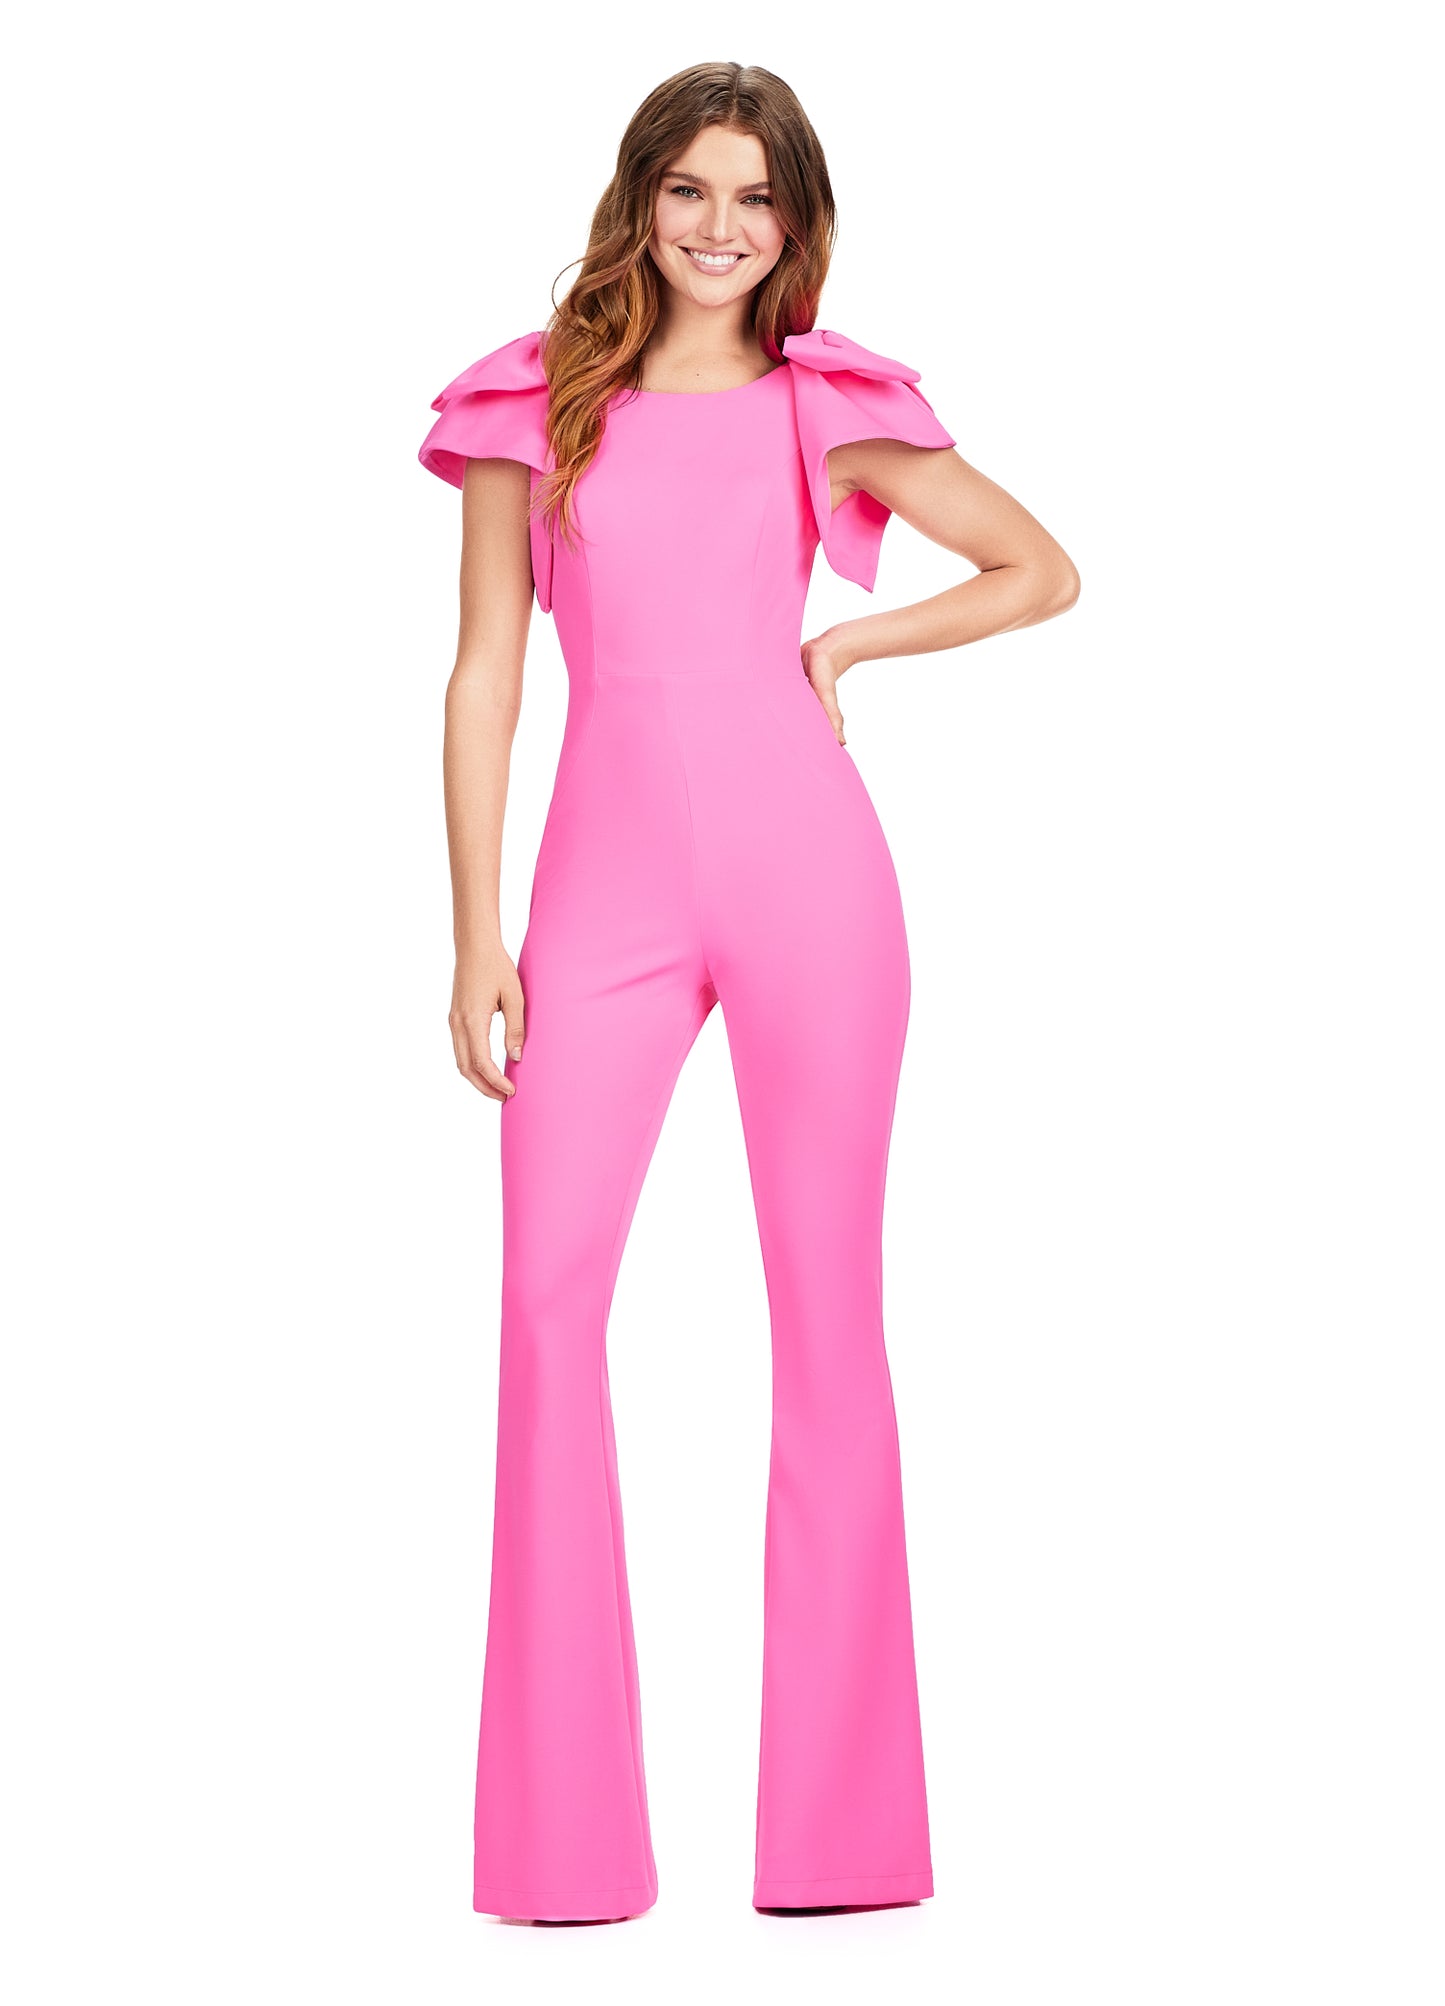 Elevate your formalwear with the Ashley Lauren 11422 Prom Scuba Jumpsuit. Made from high-quality scuba fabric, this jumpsuit features oversized bows for a unique touch. Perfect for pageants and prom, it's sure to make a statement. Experience comfort and style in one with this must-have piece. Step out in style in this scuba jumpsuit featuring oversized bow sleeves.